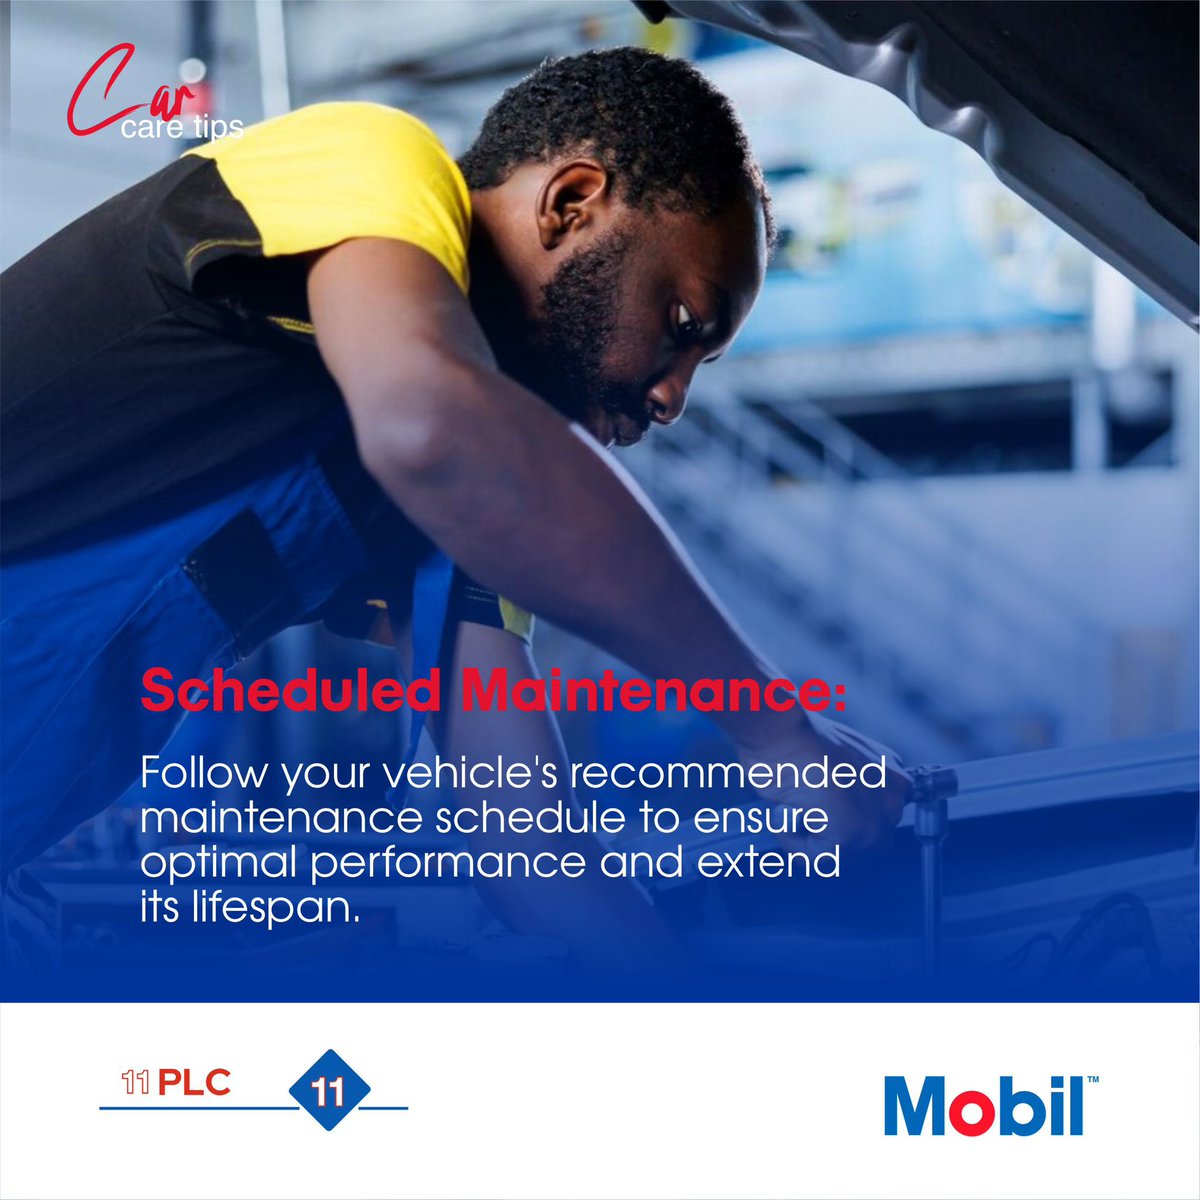 Stay on track with your vehicle's maintenance schedule! Regular tune-ups and checks can help prevent unexpected breakdowns, improve fuel efficiency, and extend the life of your car. Follow the recommended schedule and keep your vehicle running like new! 

#mobilinnigeria